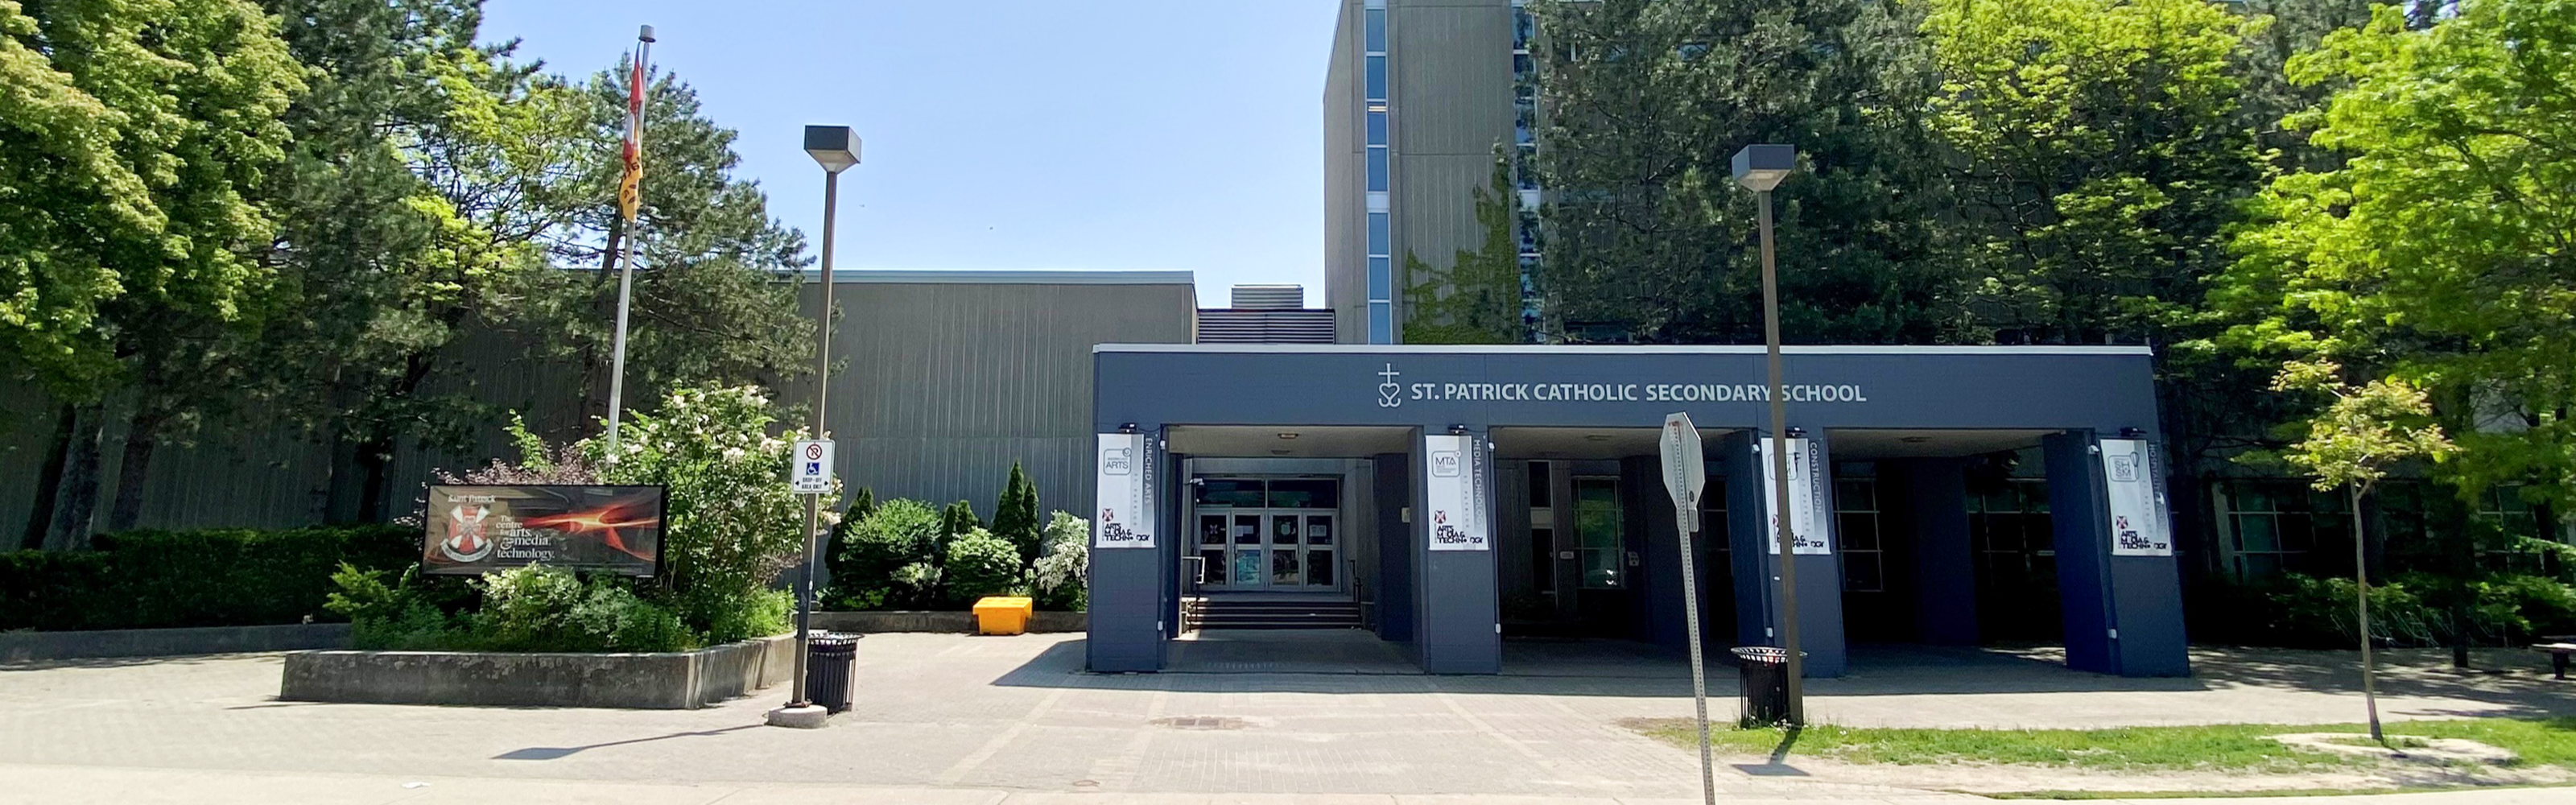 Front of the St. Patrick Catholic Secondary School building